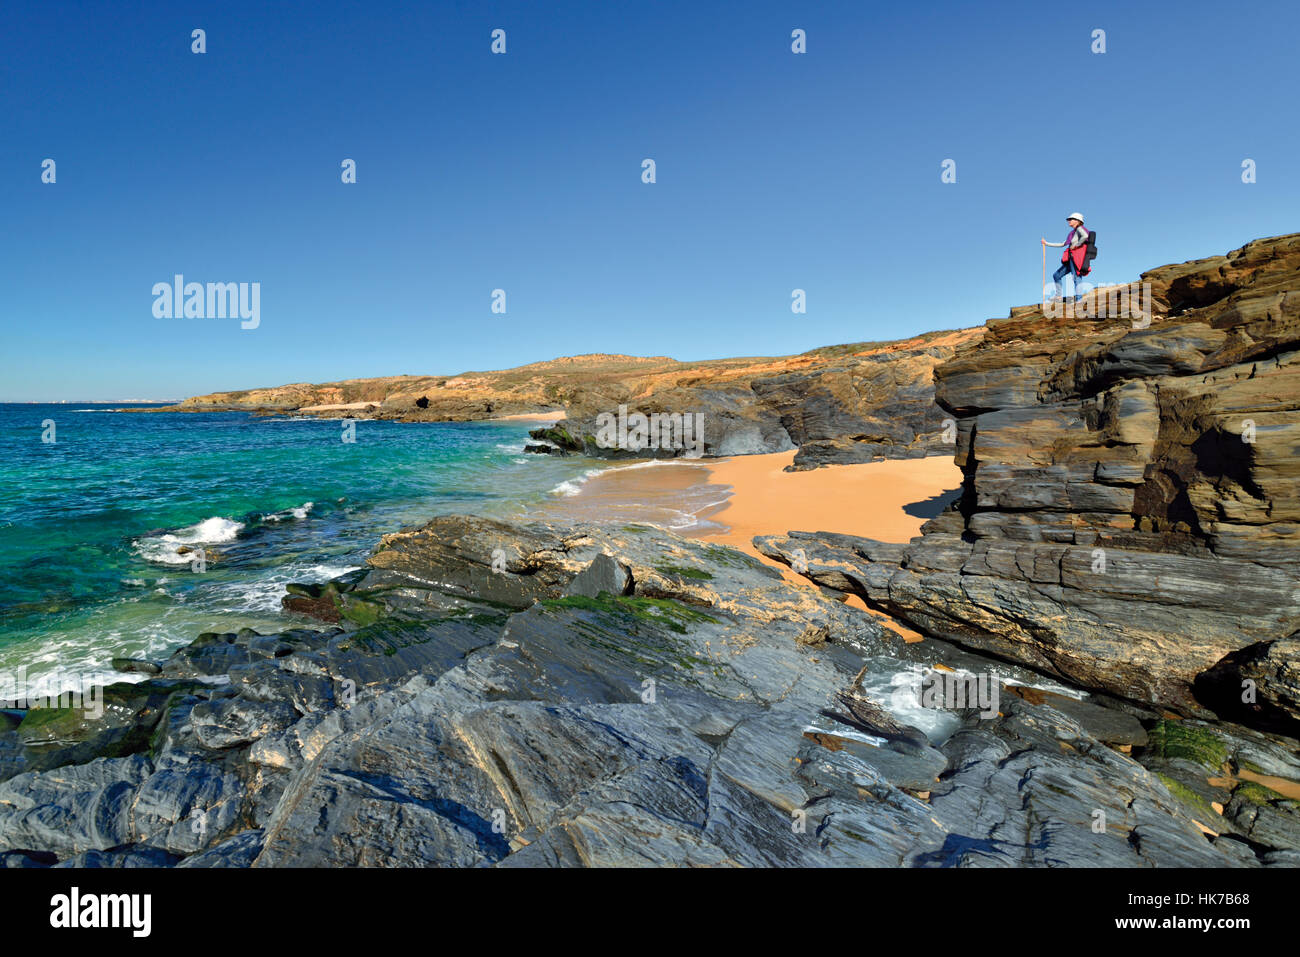 Woman standing at the edge of a rocky cliff looking to natural beach Stock Photo